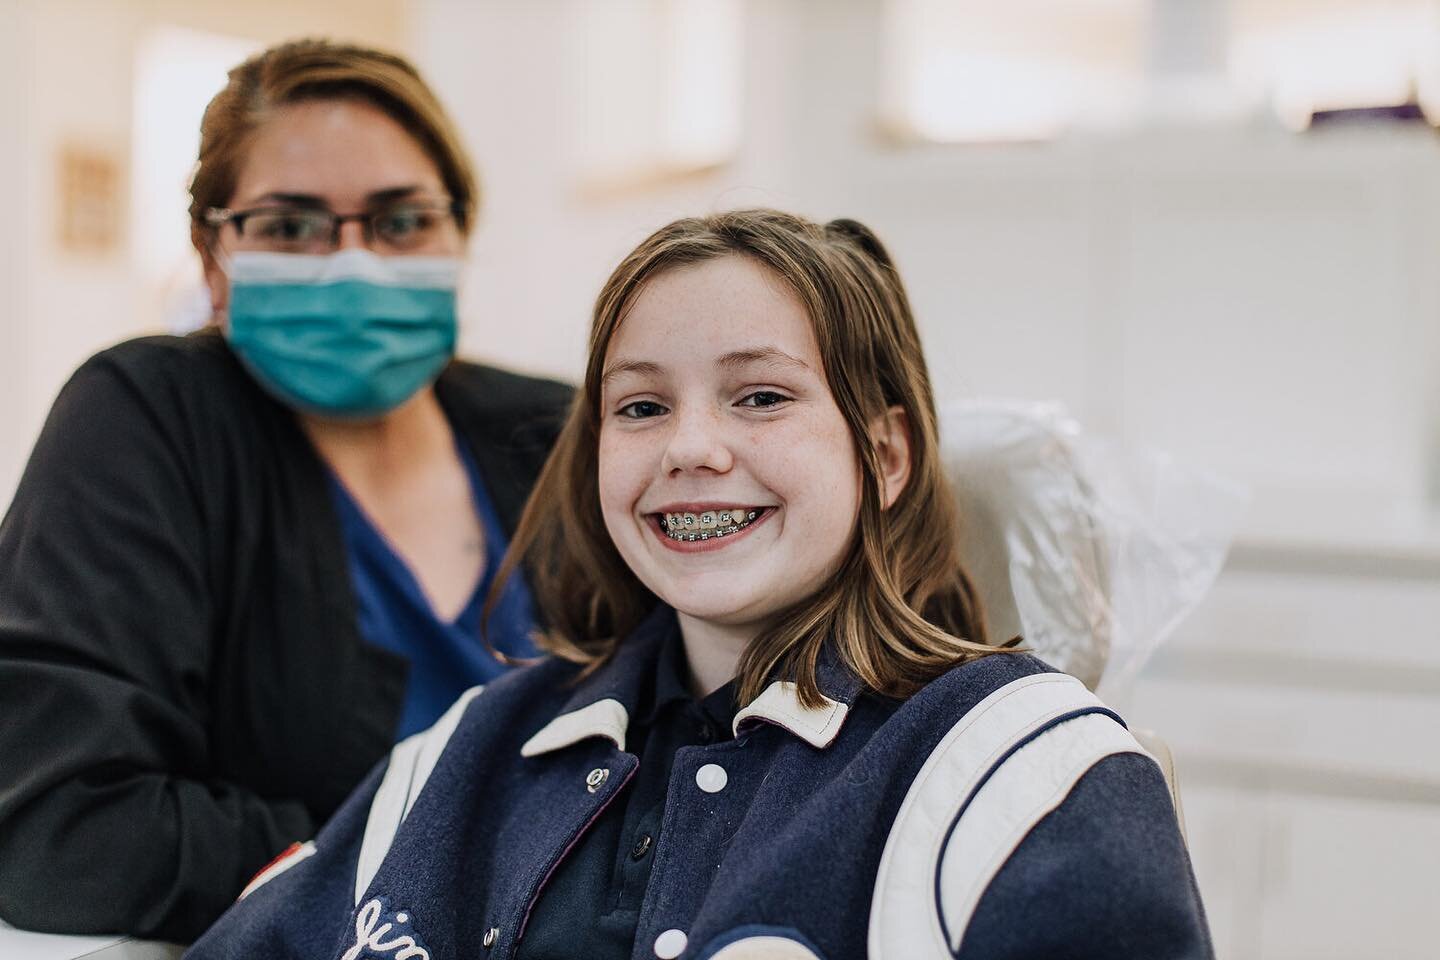 Everyone's smile is unique, which means orthodontic treatment requires specialty training. After dental school, orthodontists then complete three additional years of orthodontic education and must pass tests from the American Board of Orthodontics be